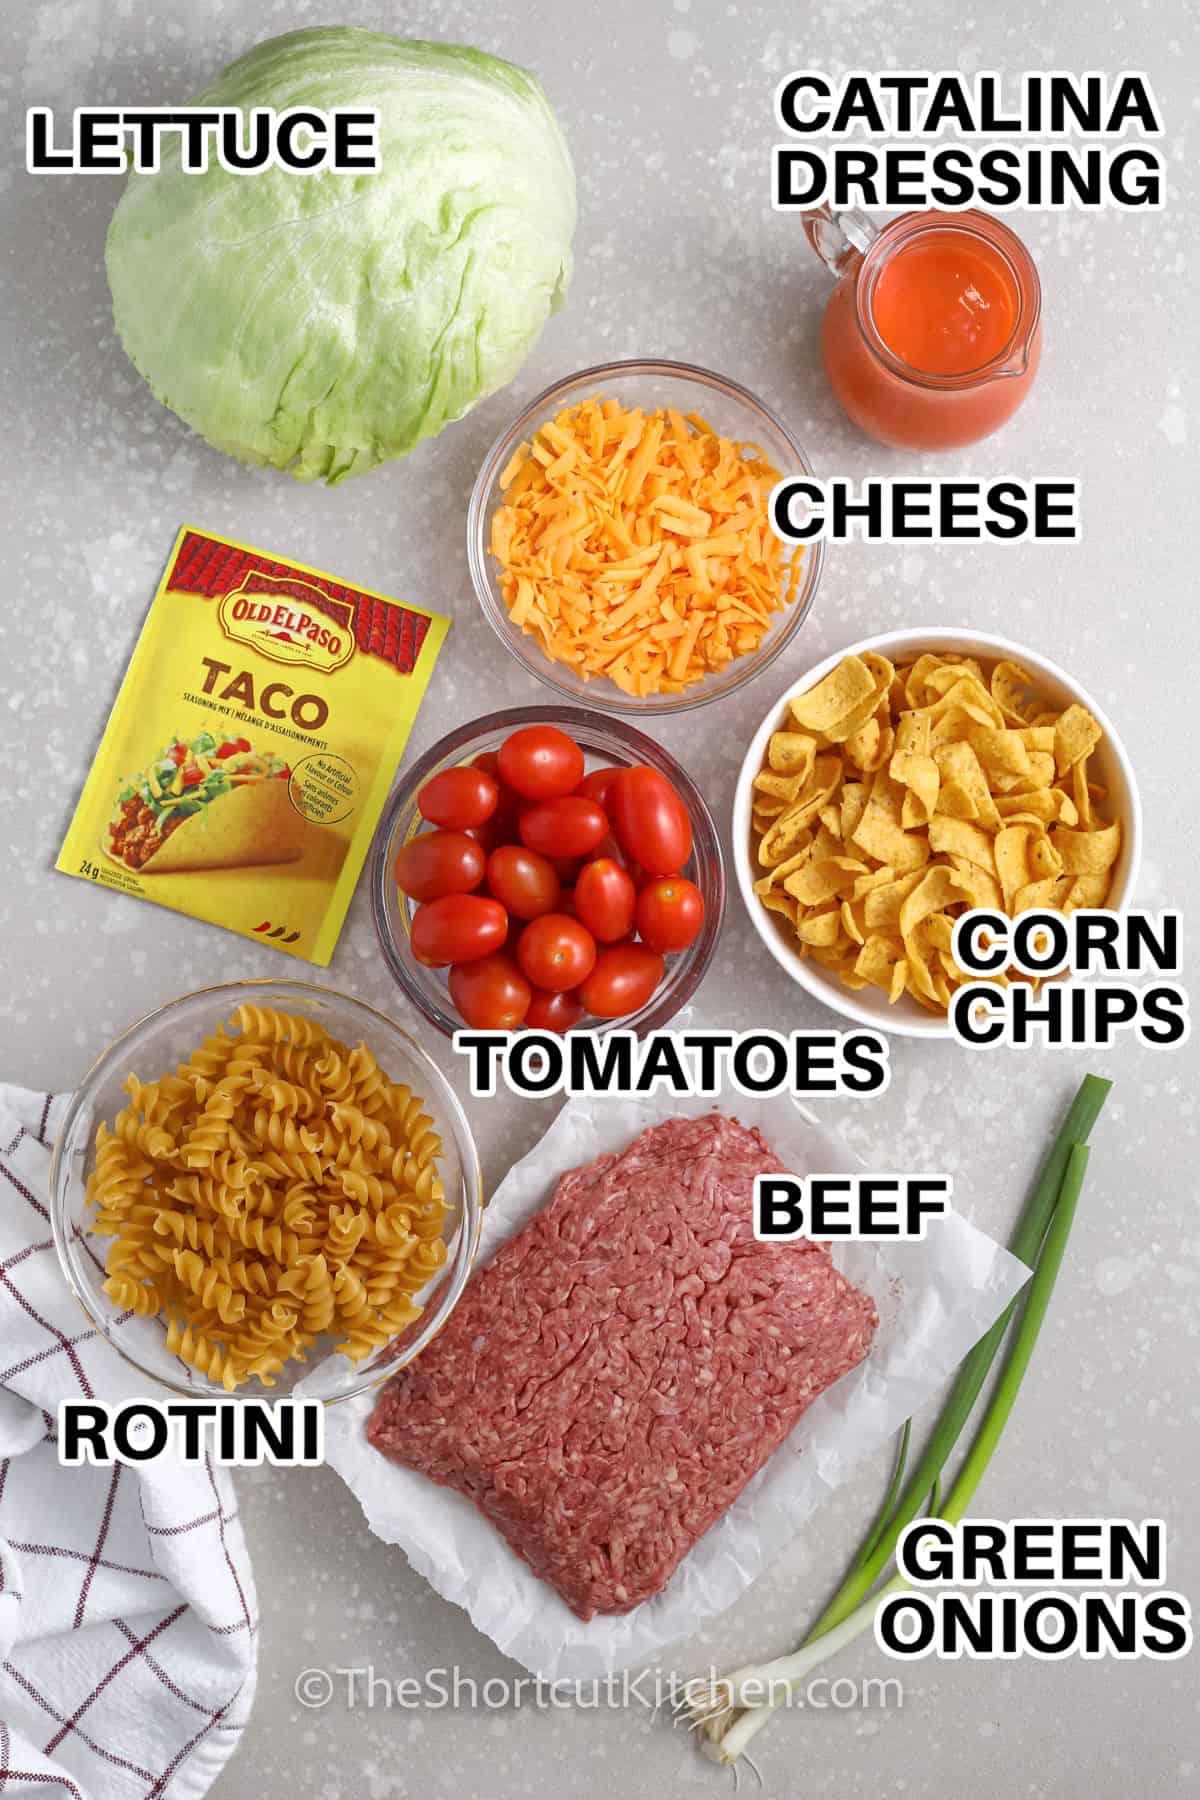 lettuce , catalina dressing , cheese, corn chips , tomatoes , beef , rotini , green onions and taco seasoning with labels to make Taco Pasta Salad